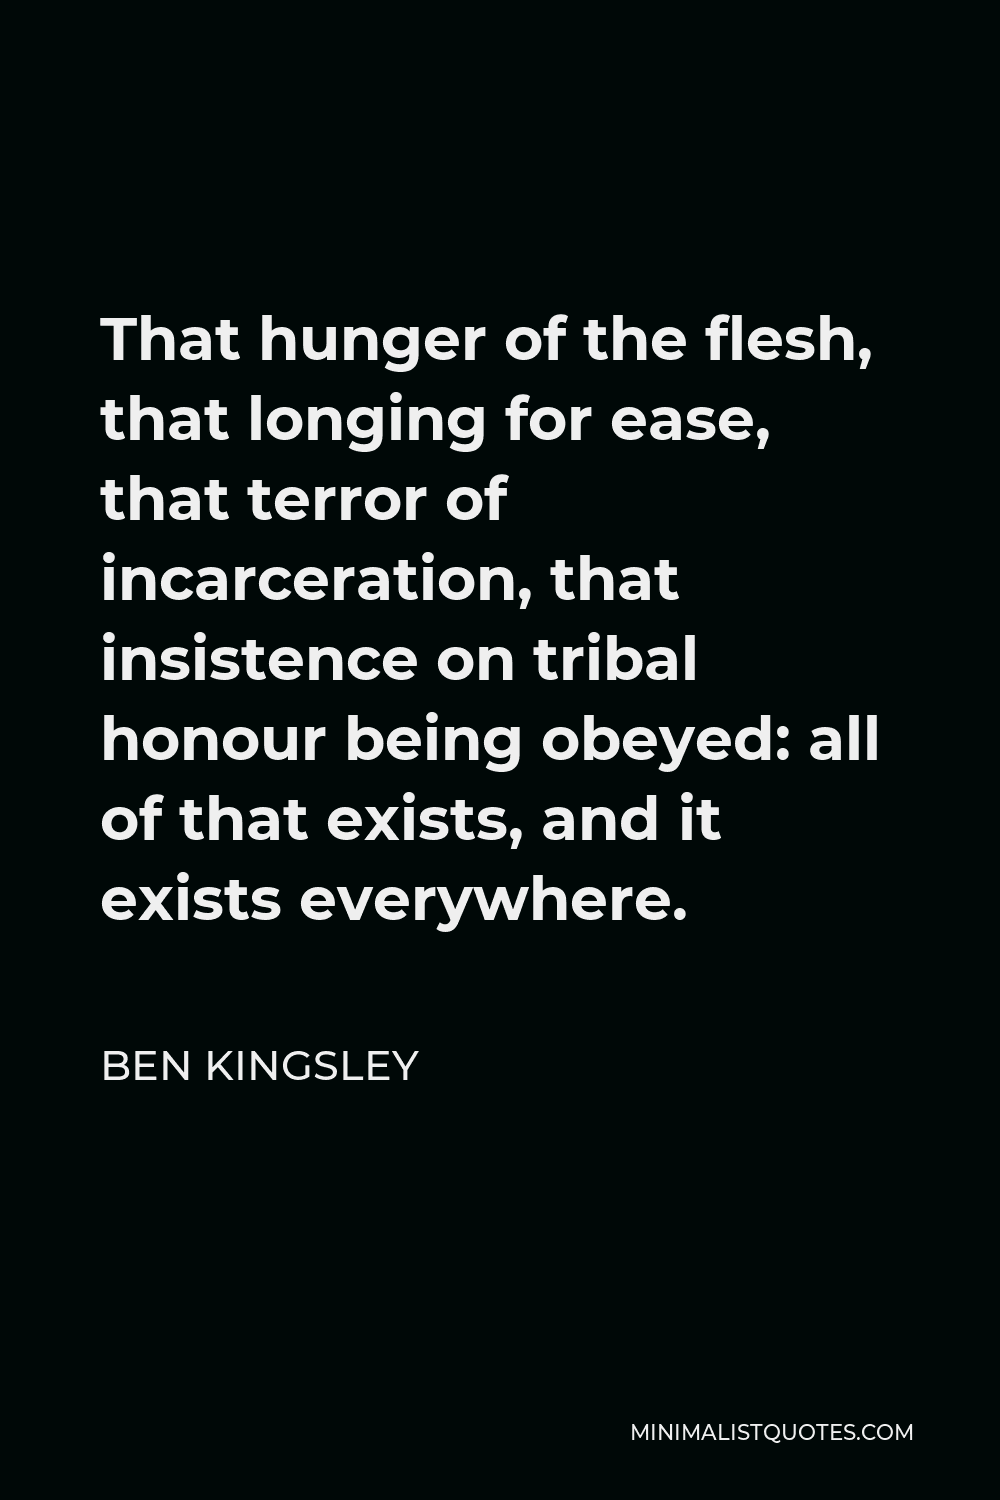 Ben Kingsley Quote - That hunger of the flesh, that longing for ease, that terror of incarceration, that insistence on tribal honour being obeyed: all of that exists, and it exists everywhere.